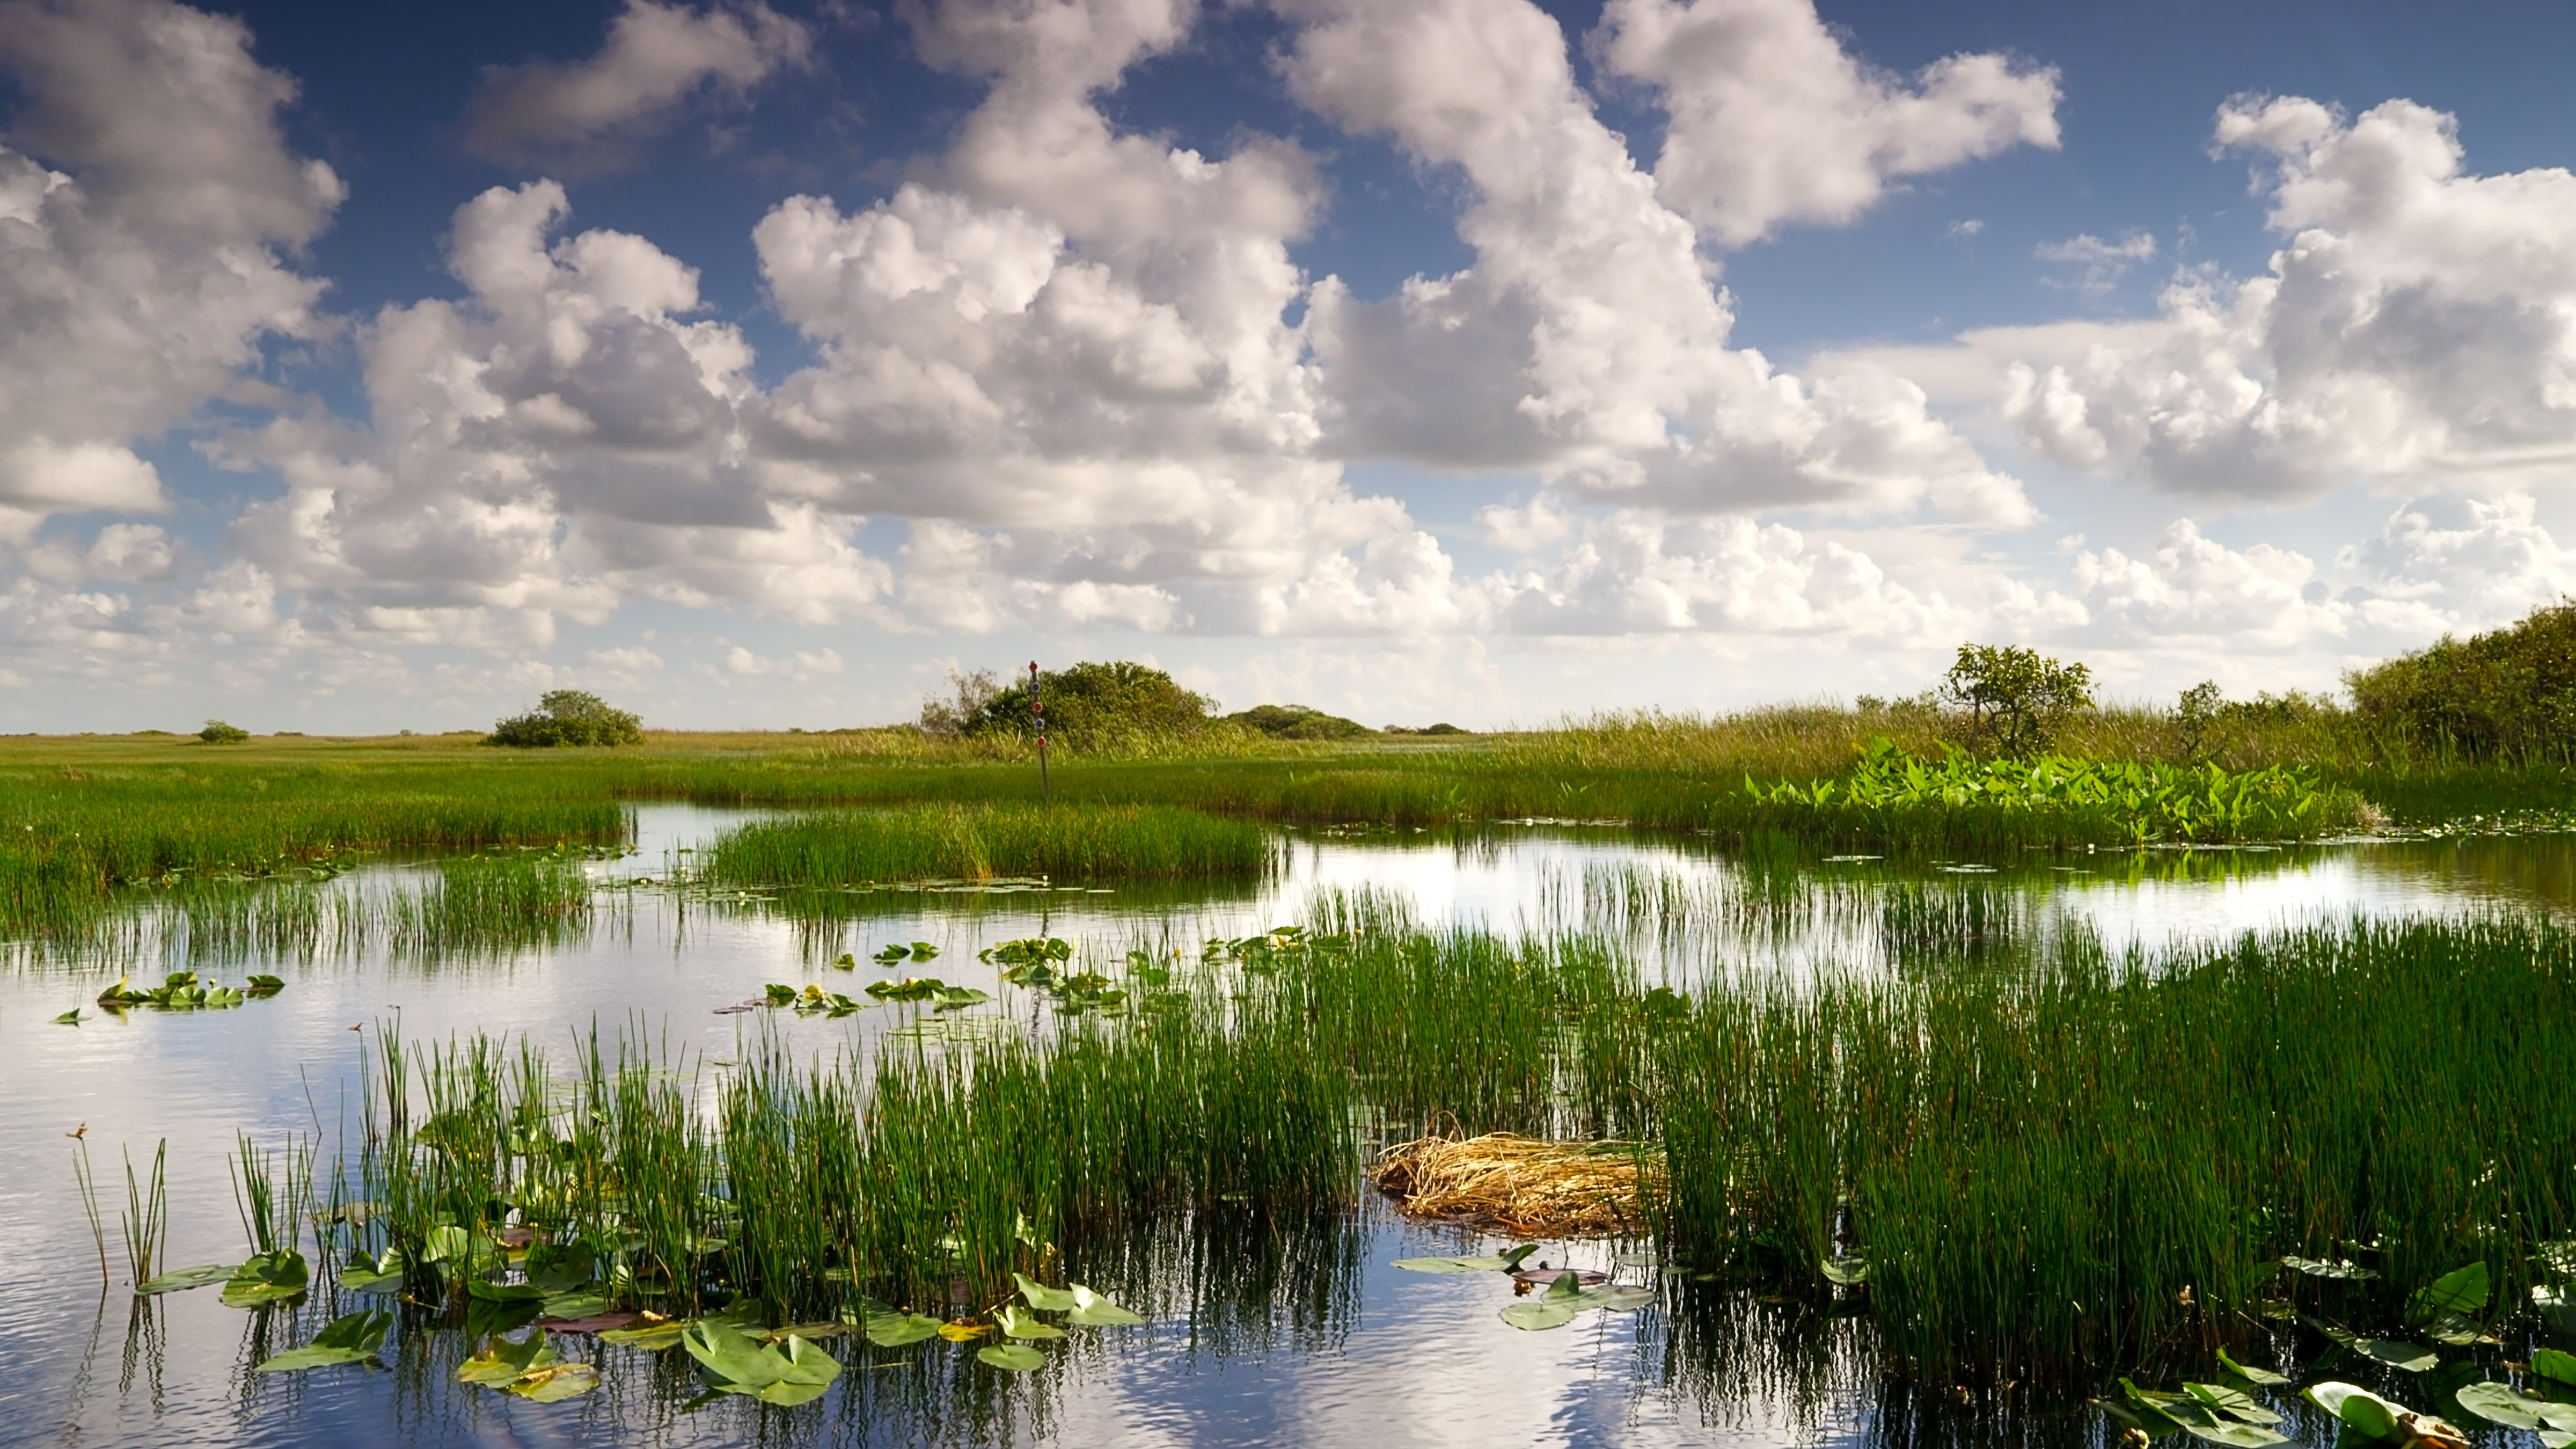 Swamp and wetlands in Big Cypress National Preserve in southern Florida